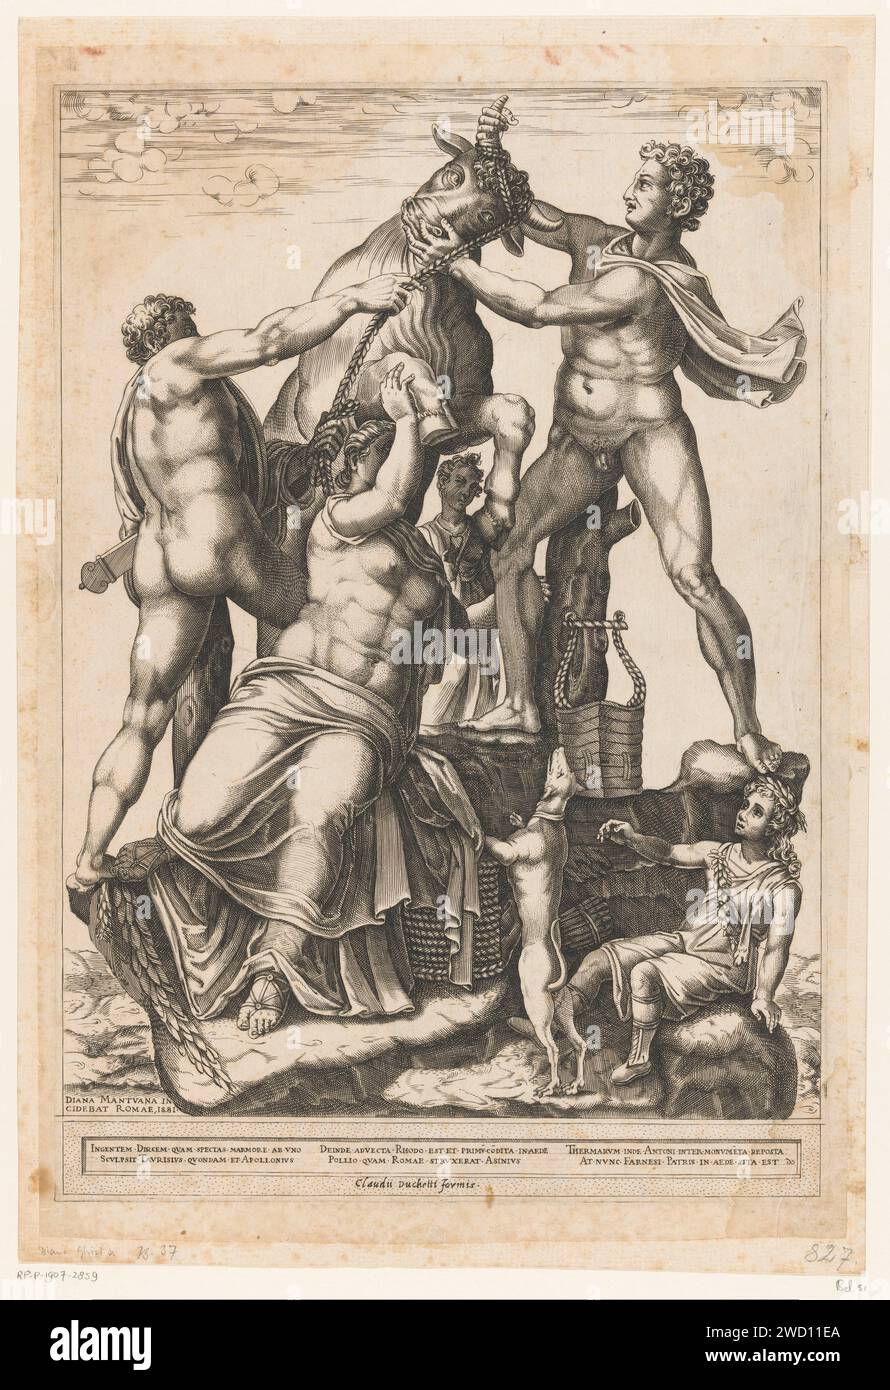 Dirce is tied to a bull, Diana Mantuana, After Anonymous, 1581 print Antique sculpture known as the Farnese bull. The Amphion and Stehus brothers tie the braided hair of Dirce to the horns of a bull. Three columns of Latin text in the lower margin. Rome paper engraving Amphion and Zethus avenge their mother by tying Dirce to the horns of a bull. piece of sculpture, reproduction of a piece of sculpture. slavery; serfs and the enslaved Stock Photo